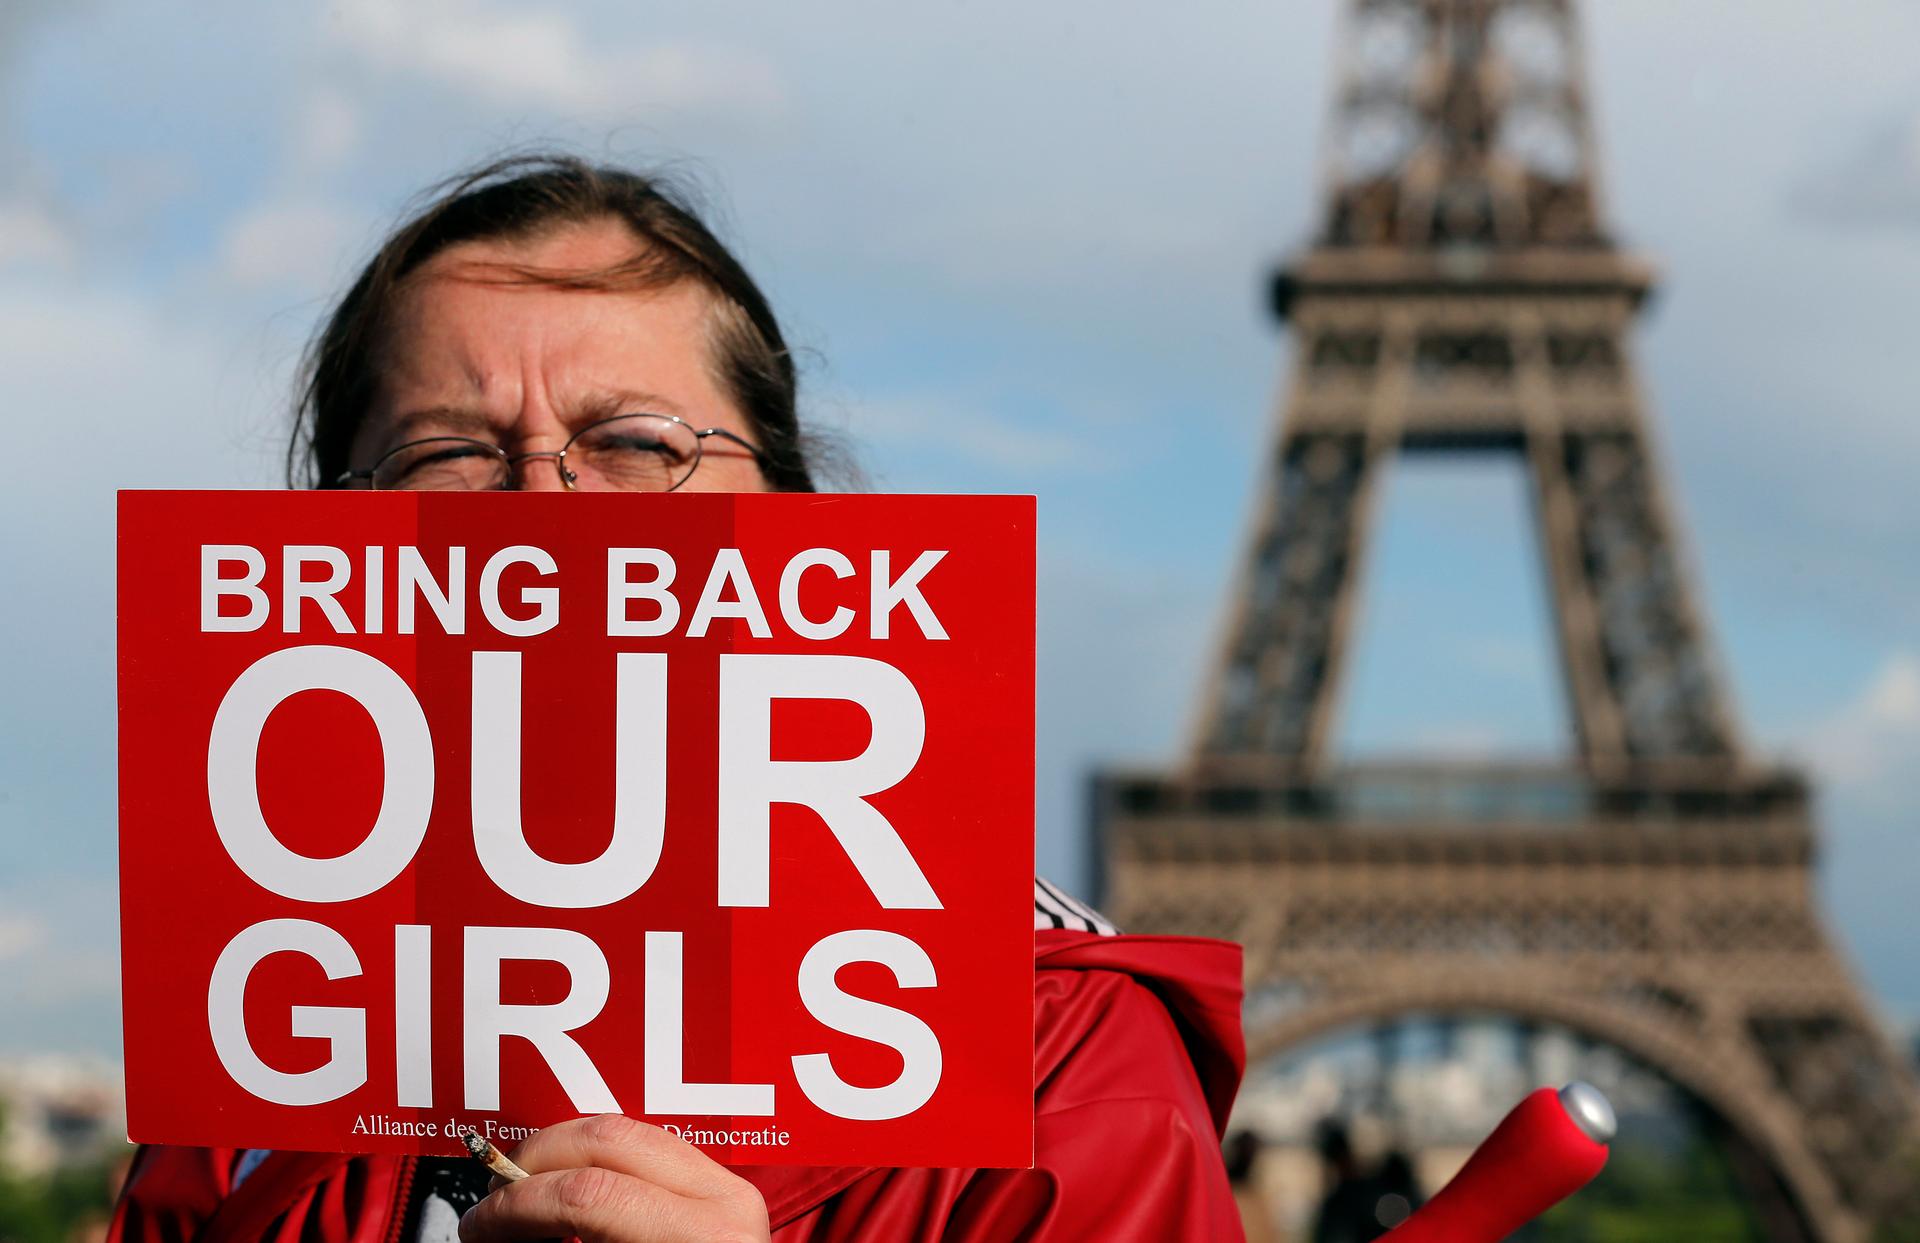 A protester at Trocadero Square near the Eiffel Tower in Paris demonstrates against  the kidnapping of school girls in Nigeria.